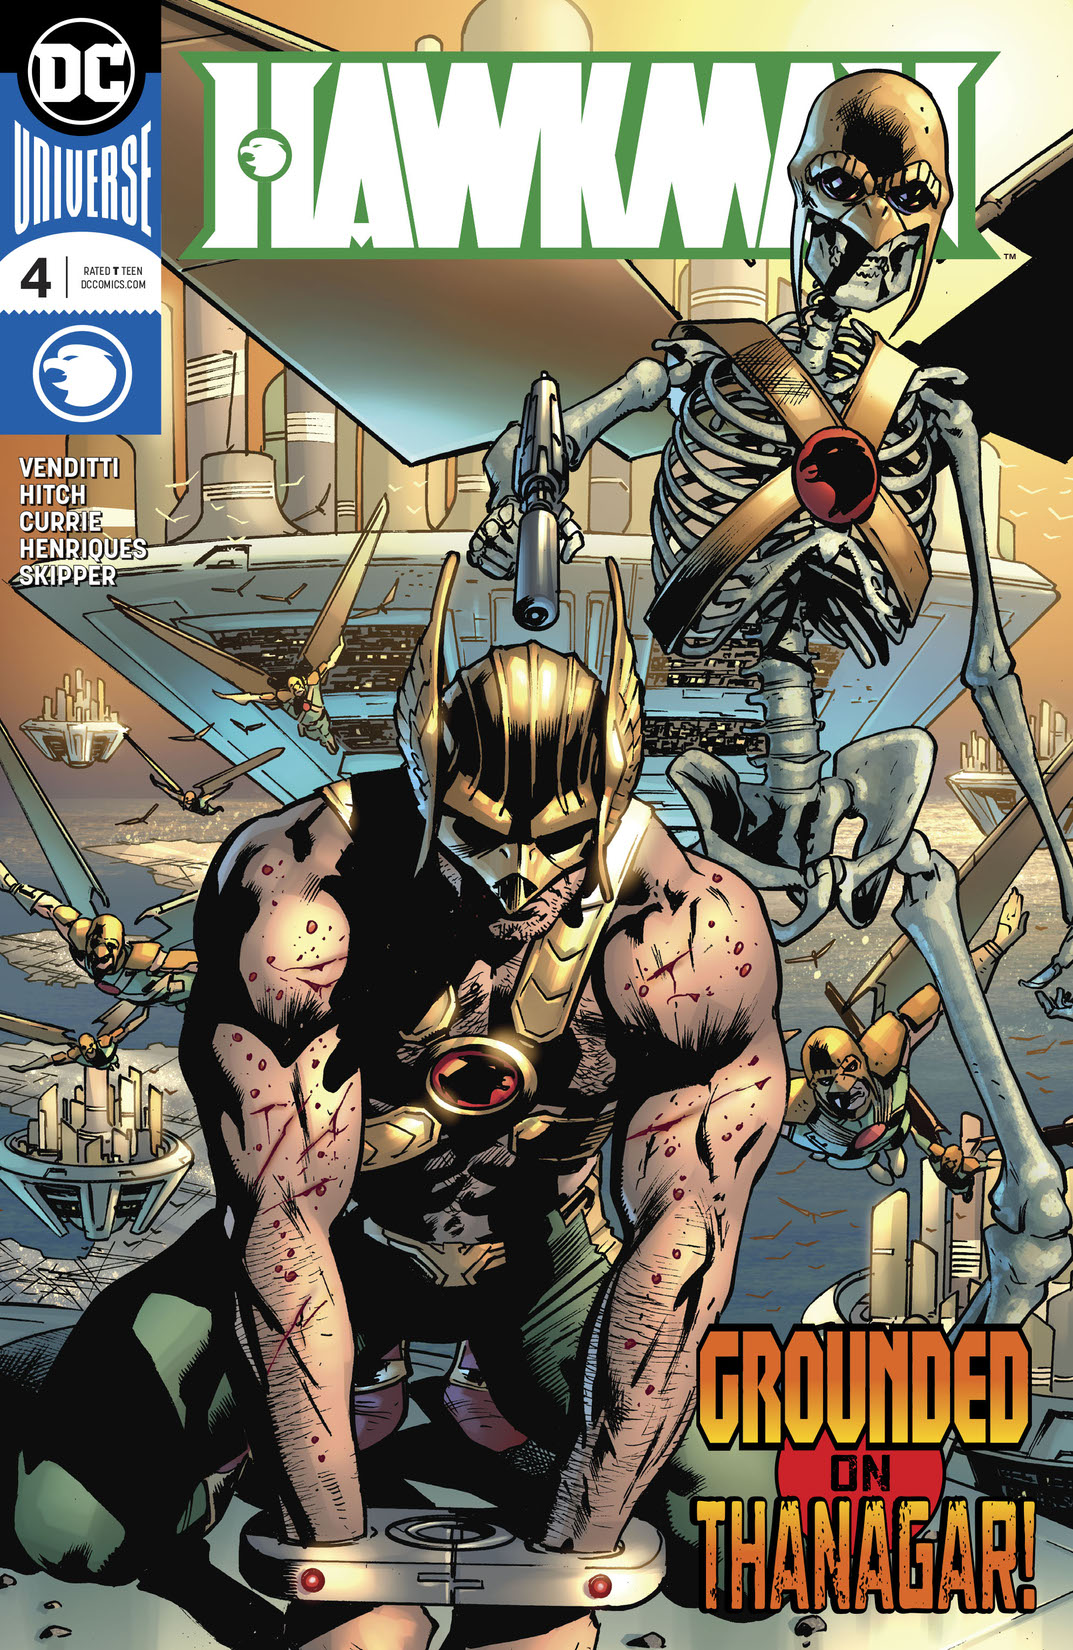 Hawkman (2018-) #4 preview images